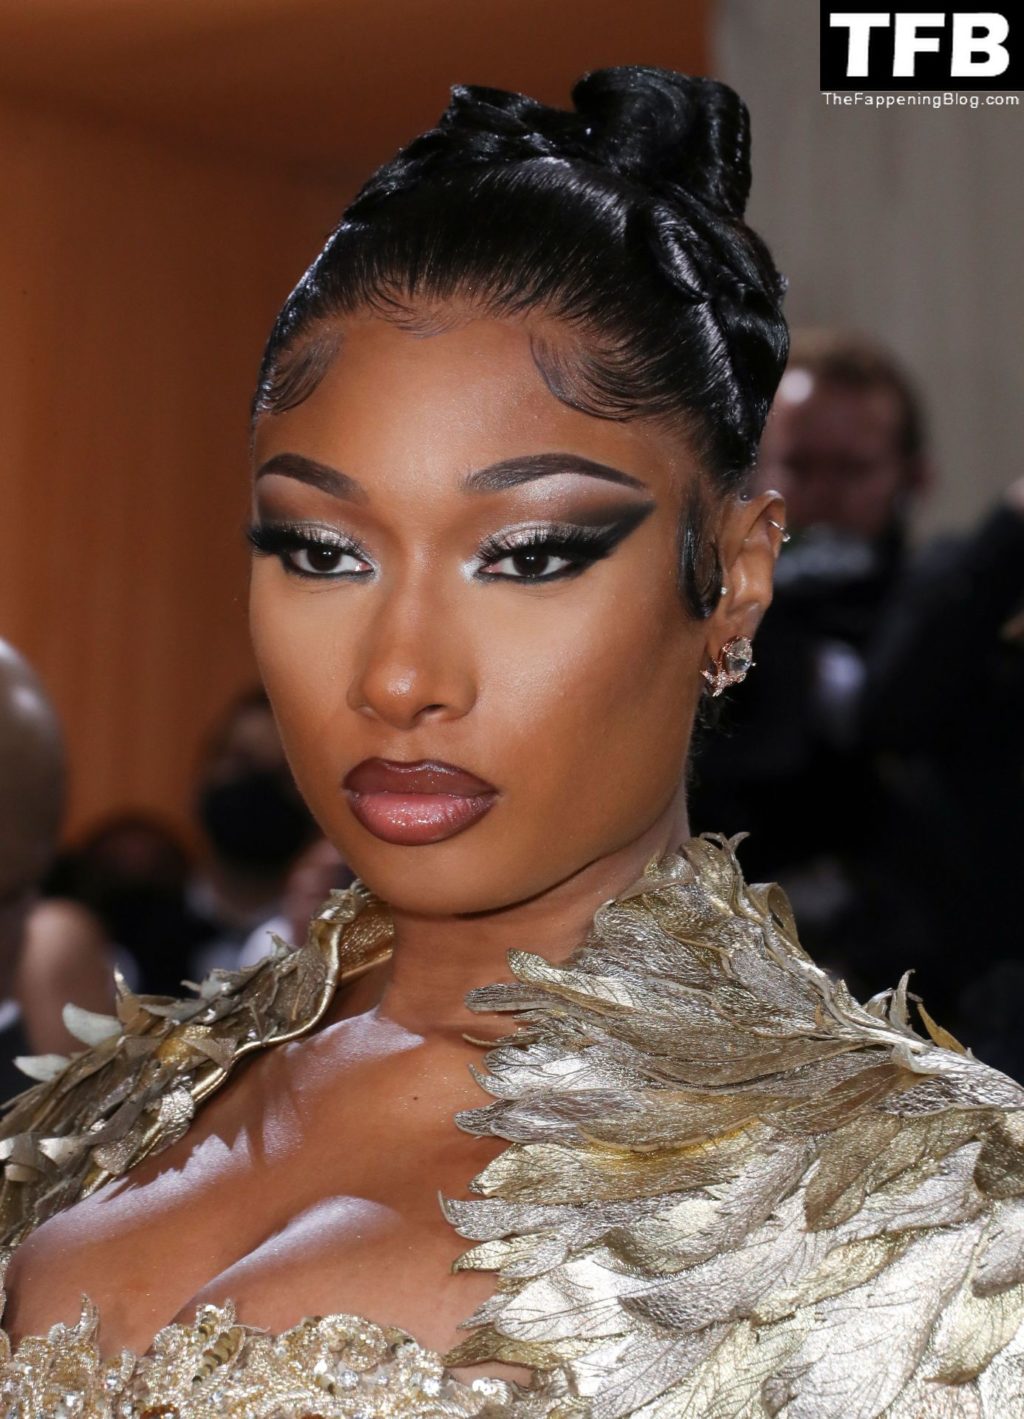 Megan Thee Stallion Displays Her Curves at The 2022 Met Gala in NYC (68 Photos)